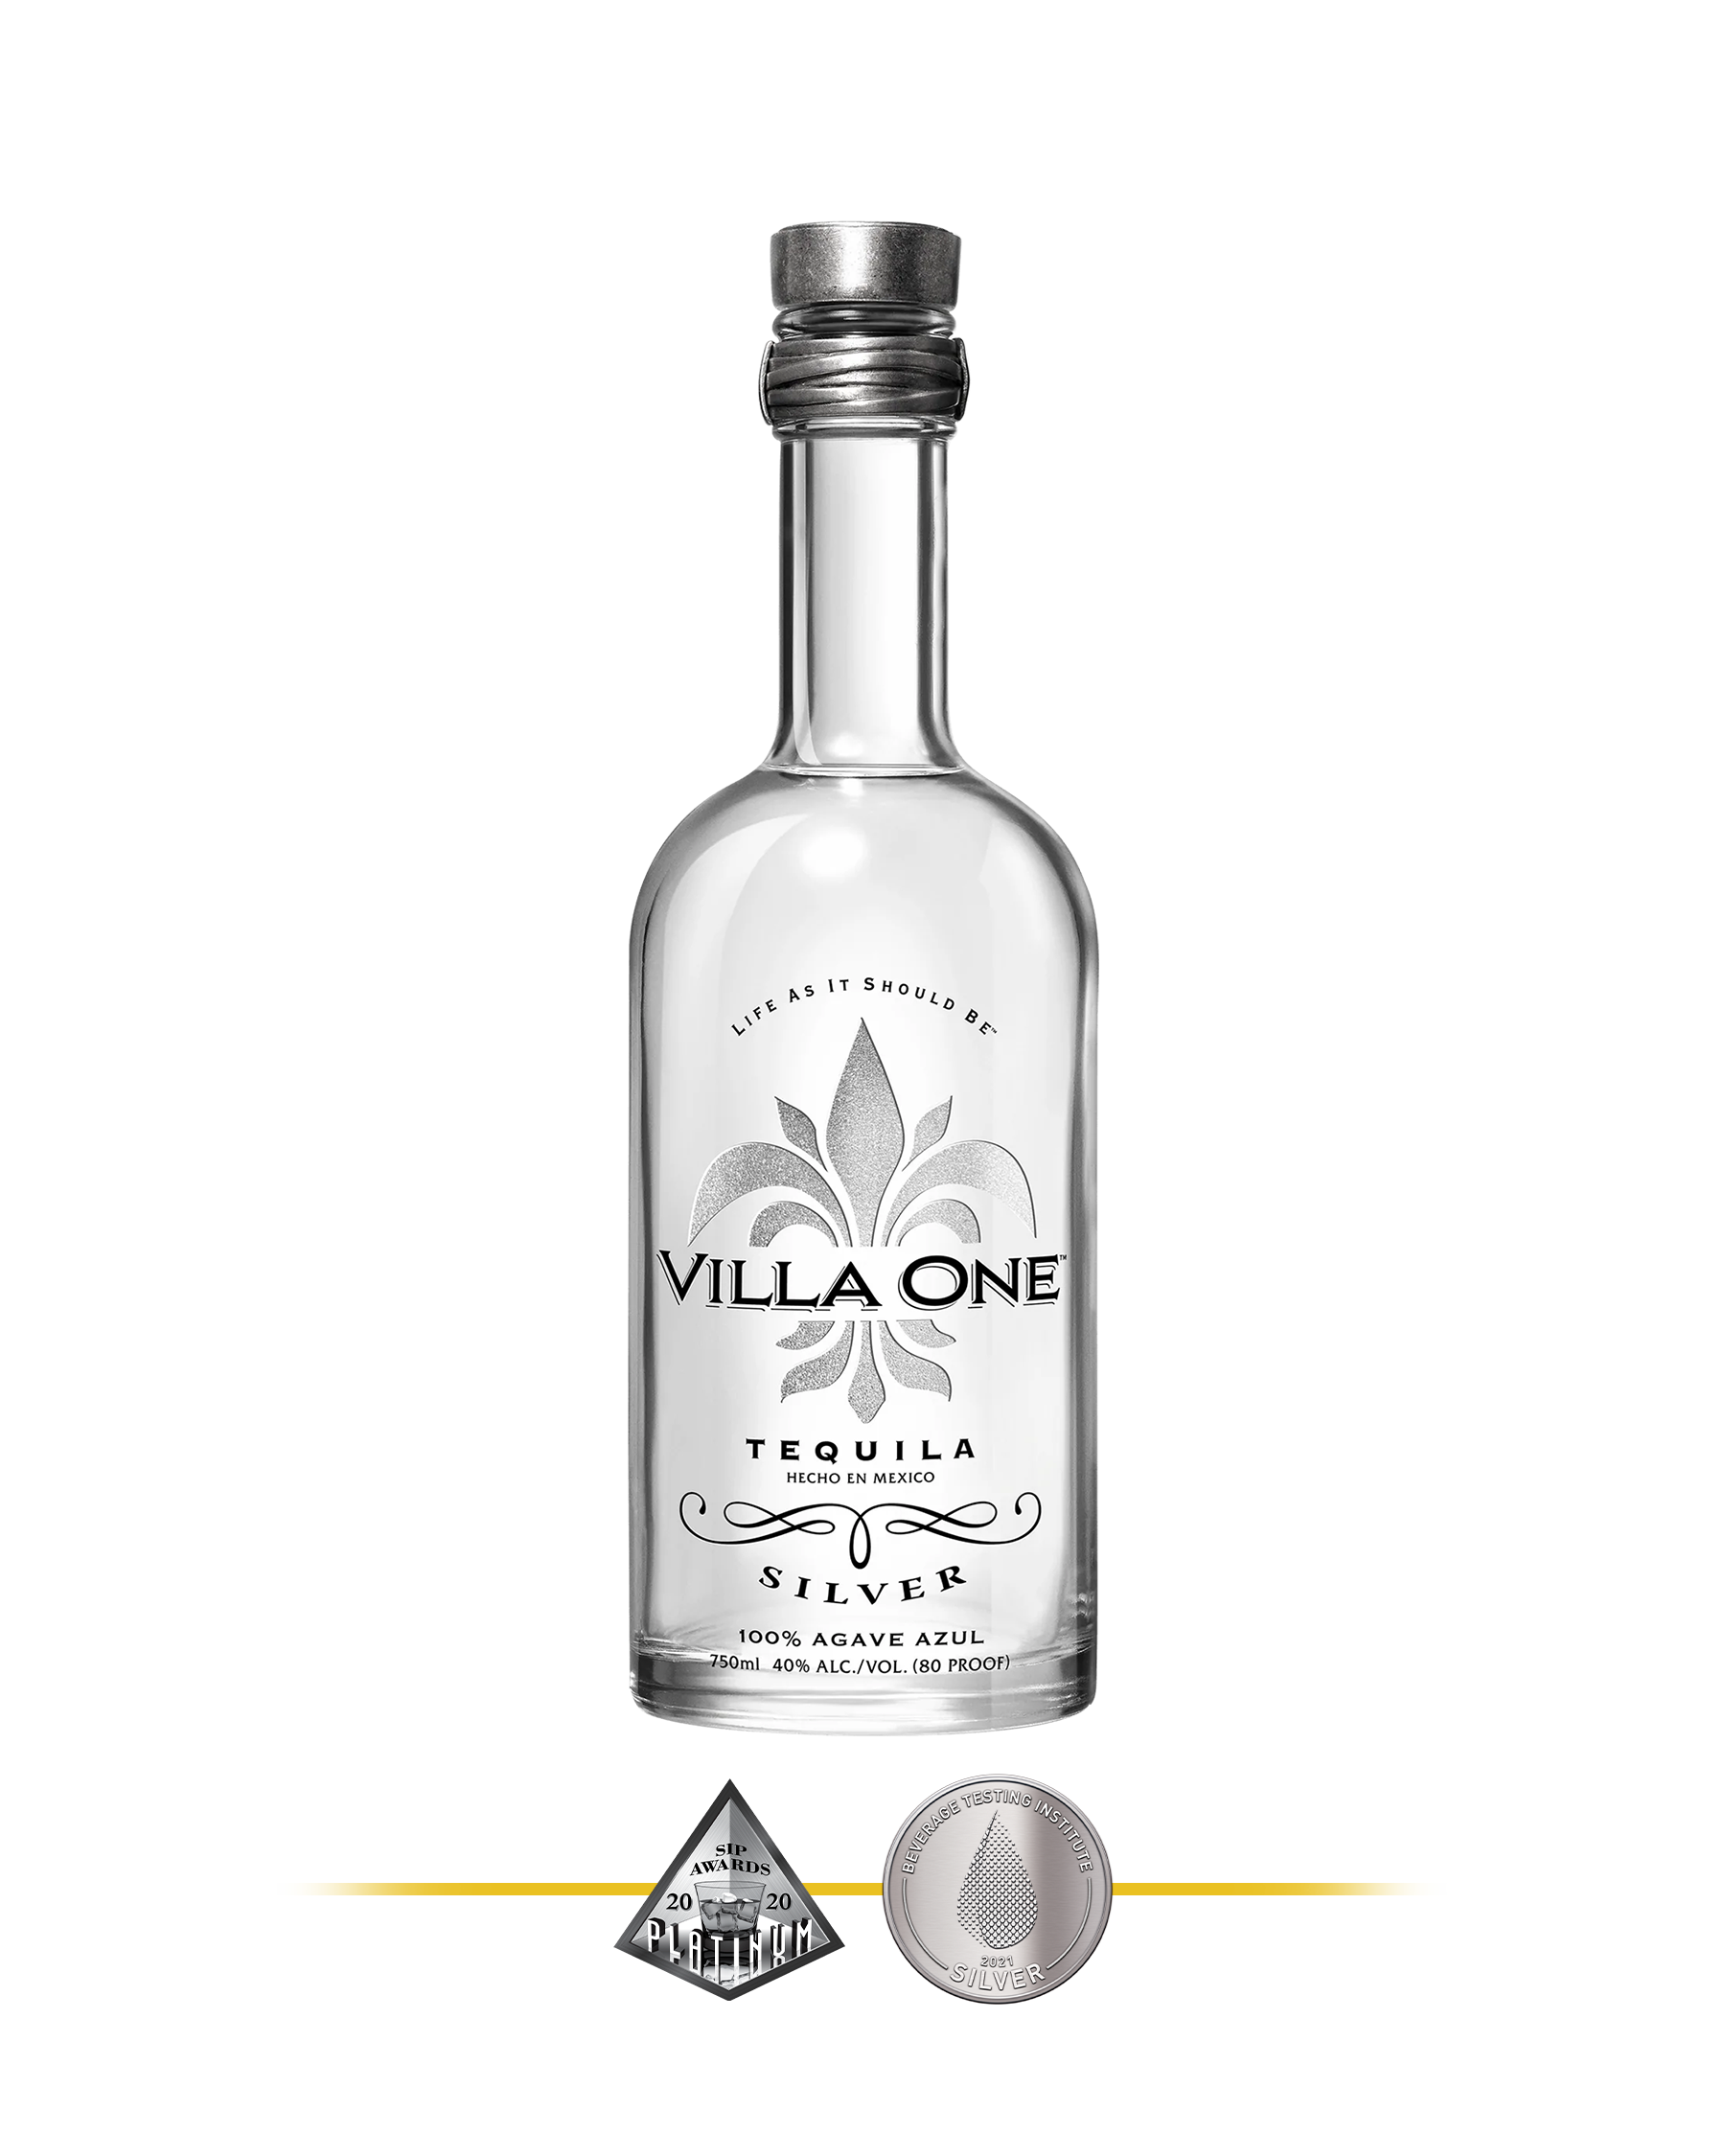 Villa One Tequila Silver, winner of the SIP Awards Platinum and the BTI Awards Silver